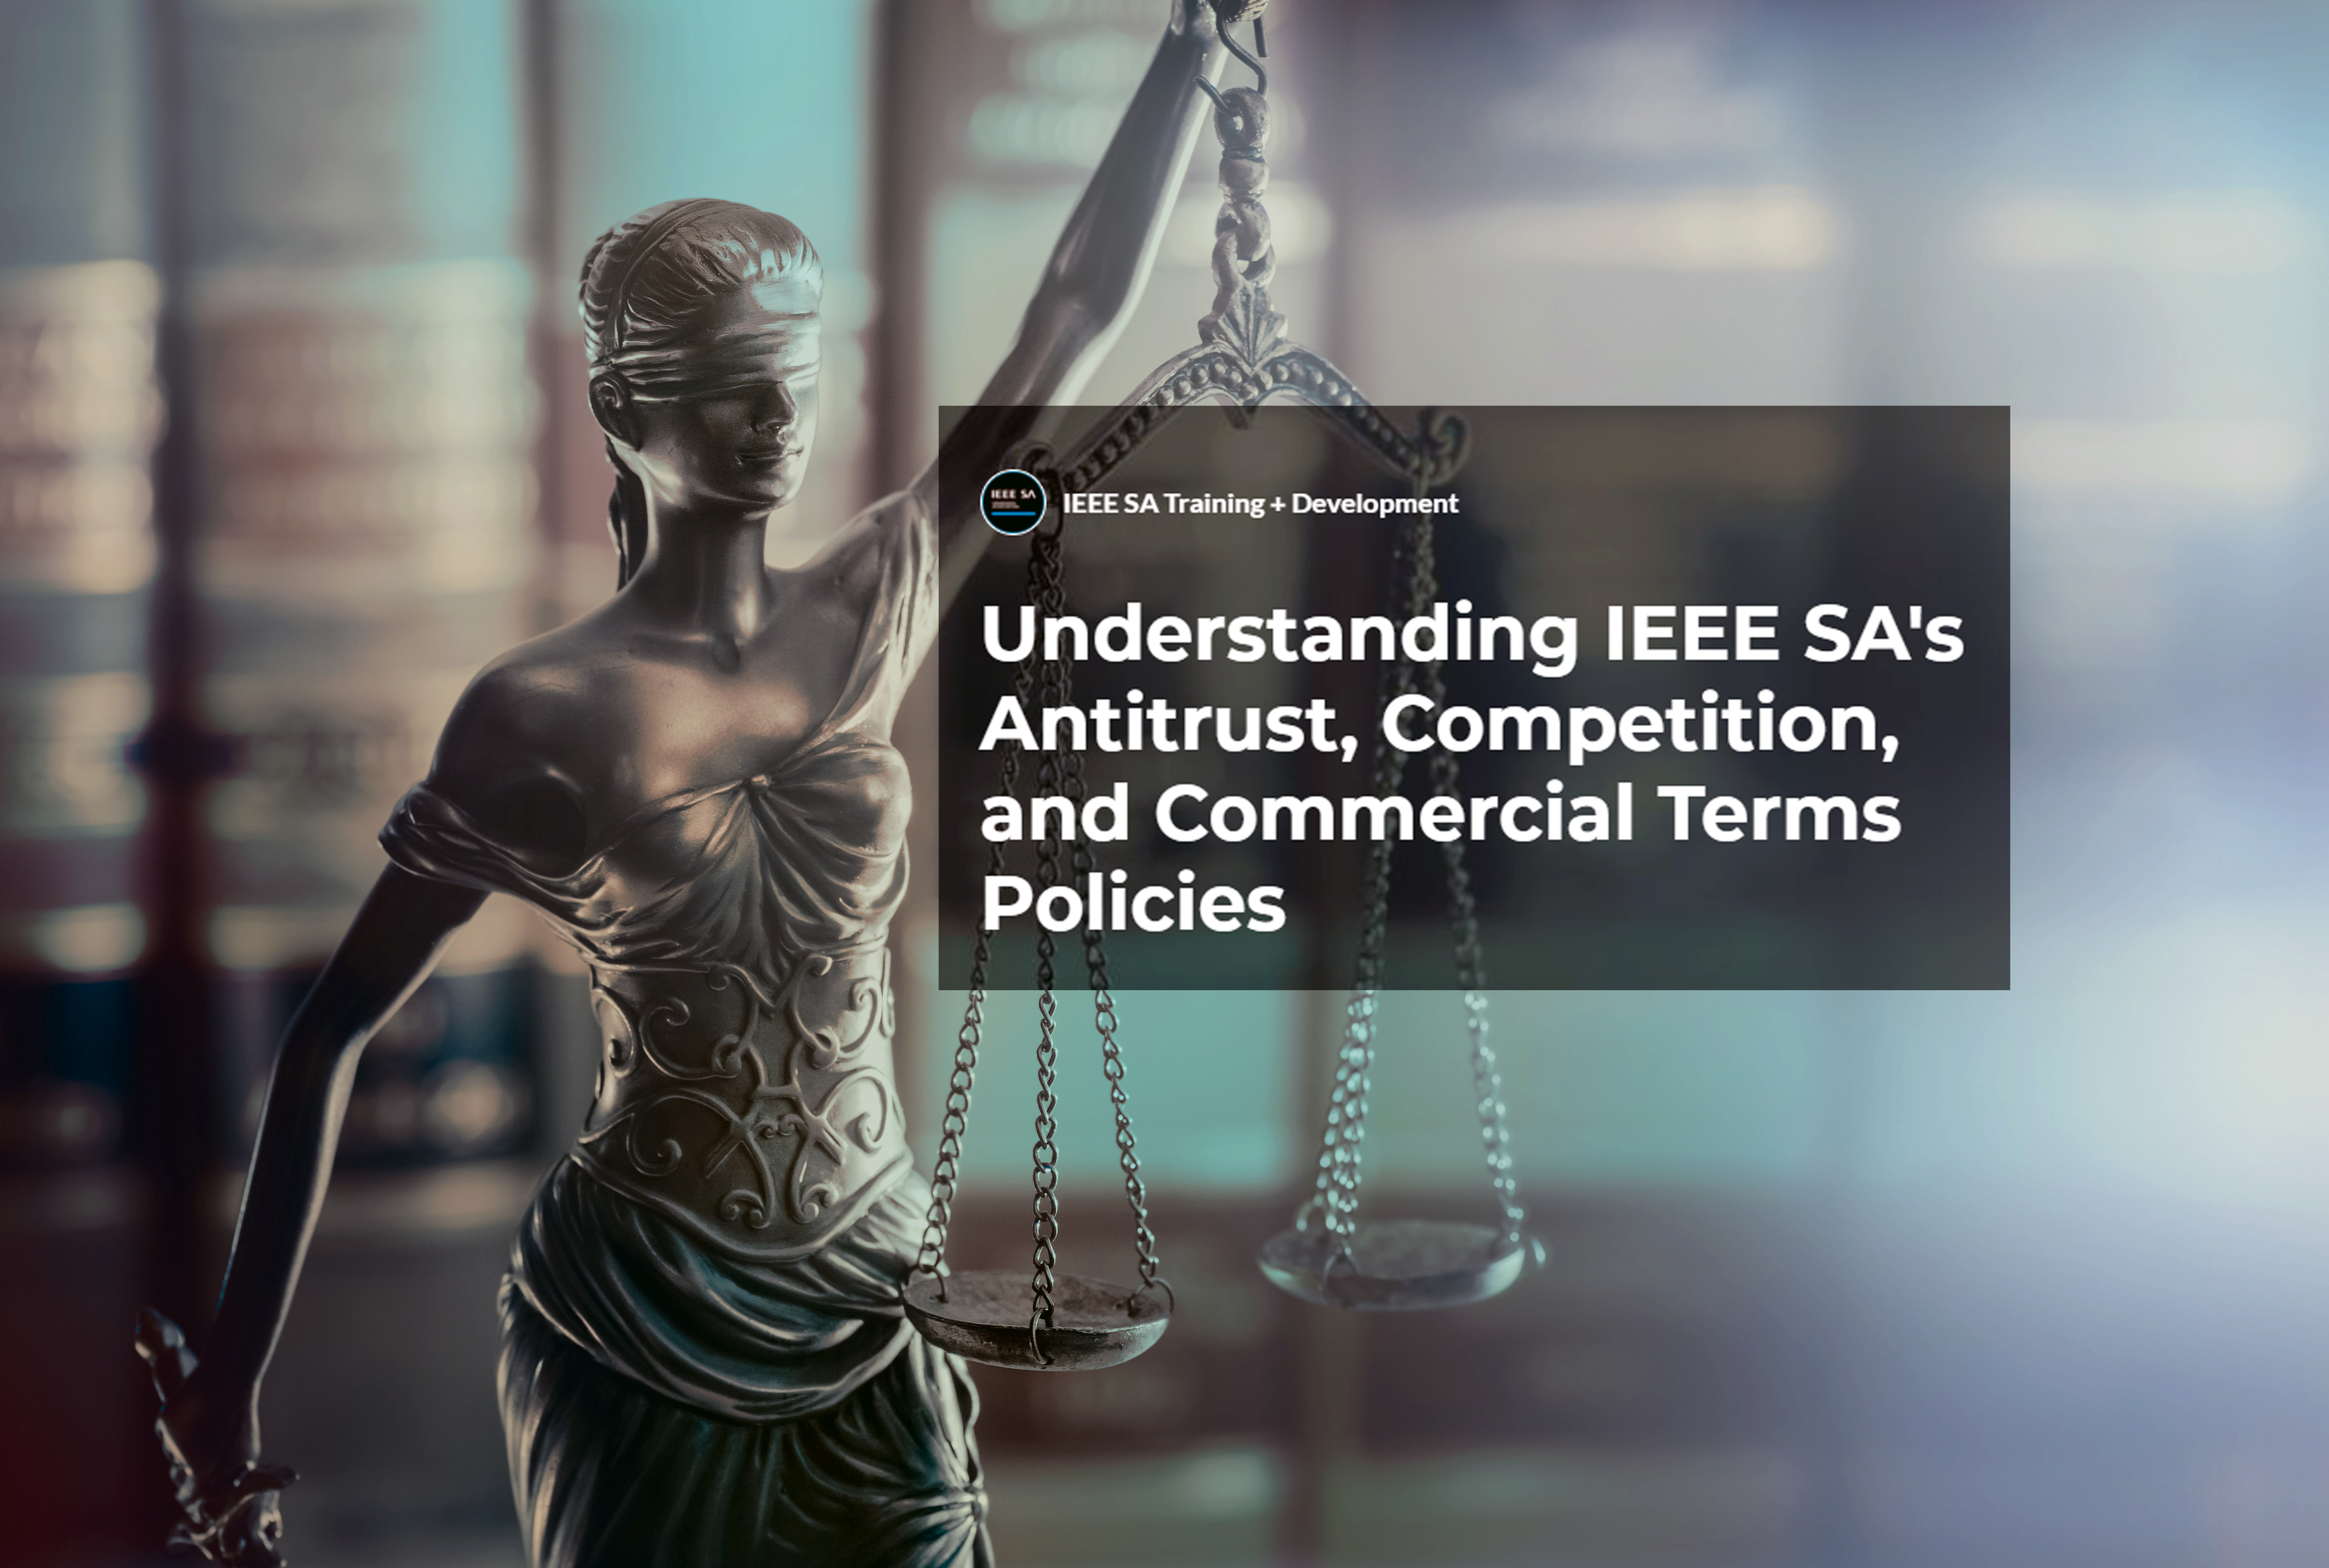 Understanding IEEE SA's Antitrust, Competition, and Commercial Terms Policies  - Traditional Chinese